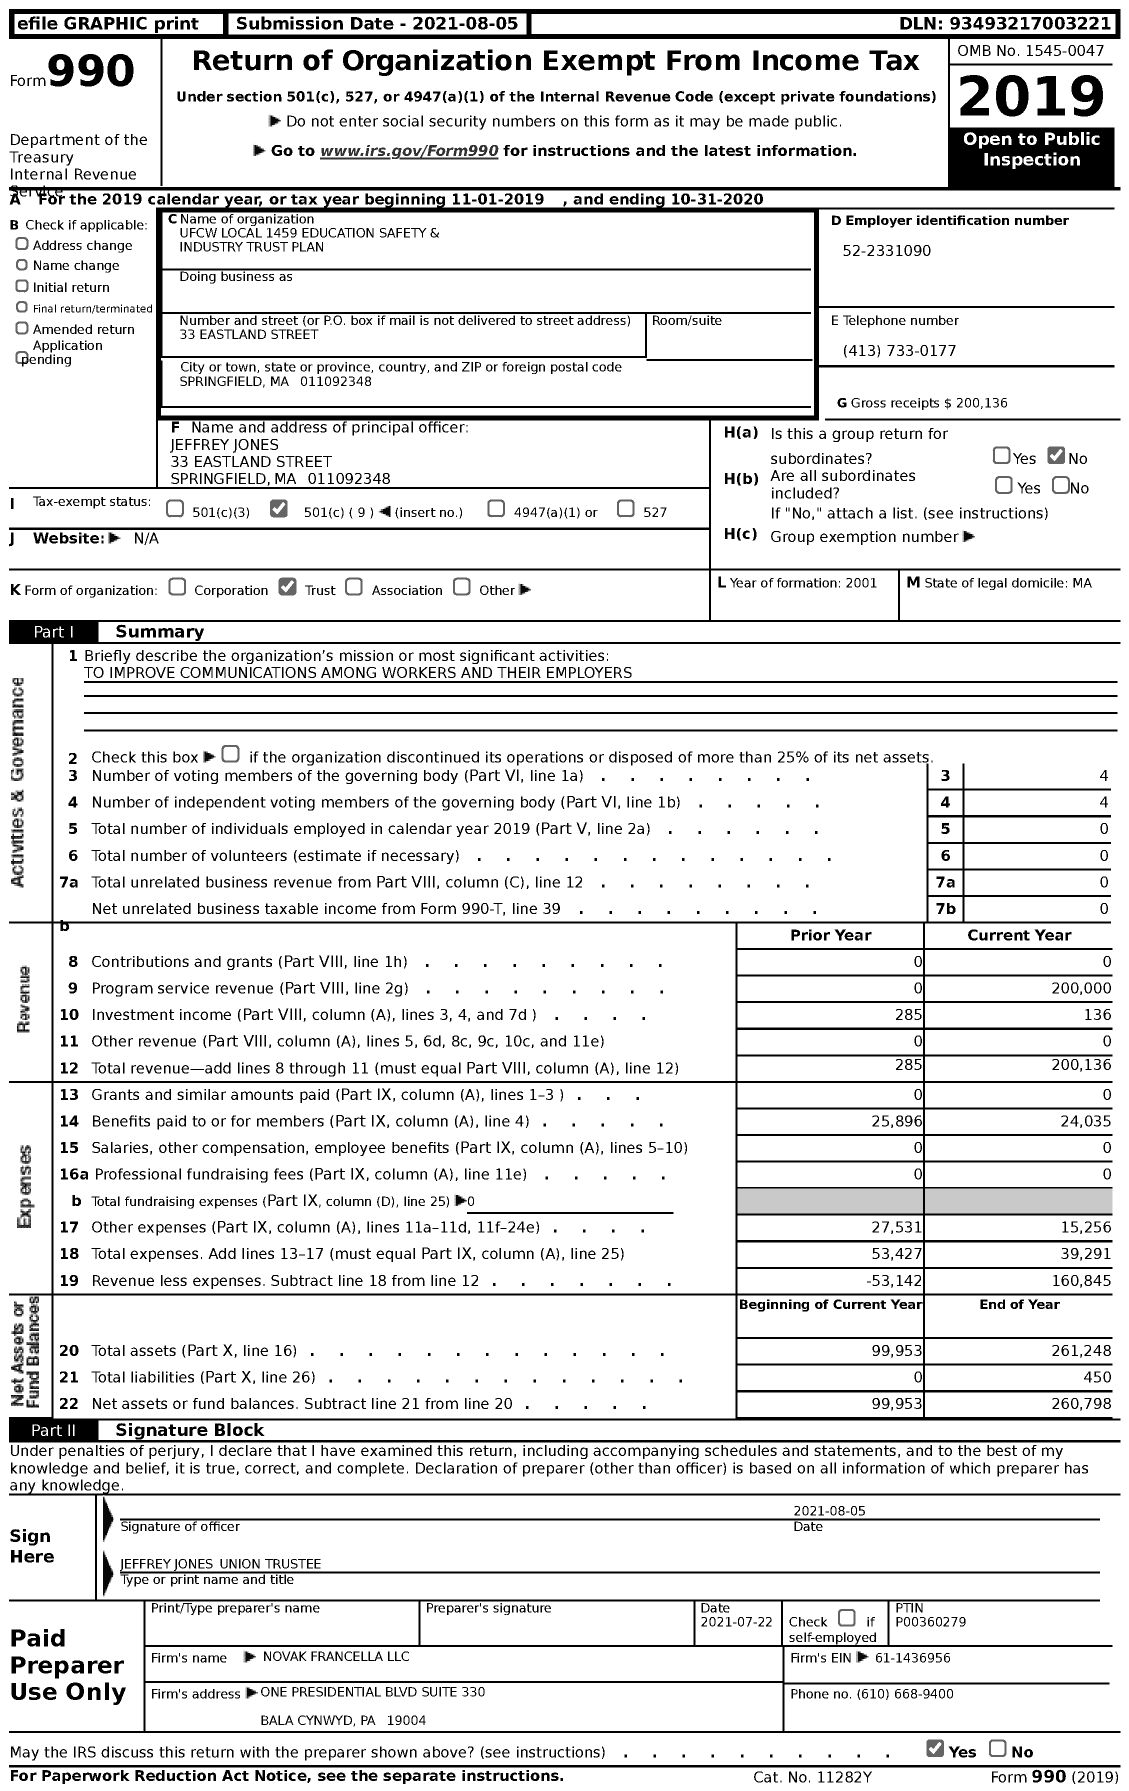 Image of first page of 2019 Form 990 for Ufcw Local 1459 Education Safety and Industry Trust Plan